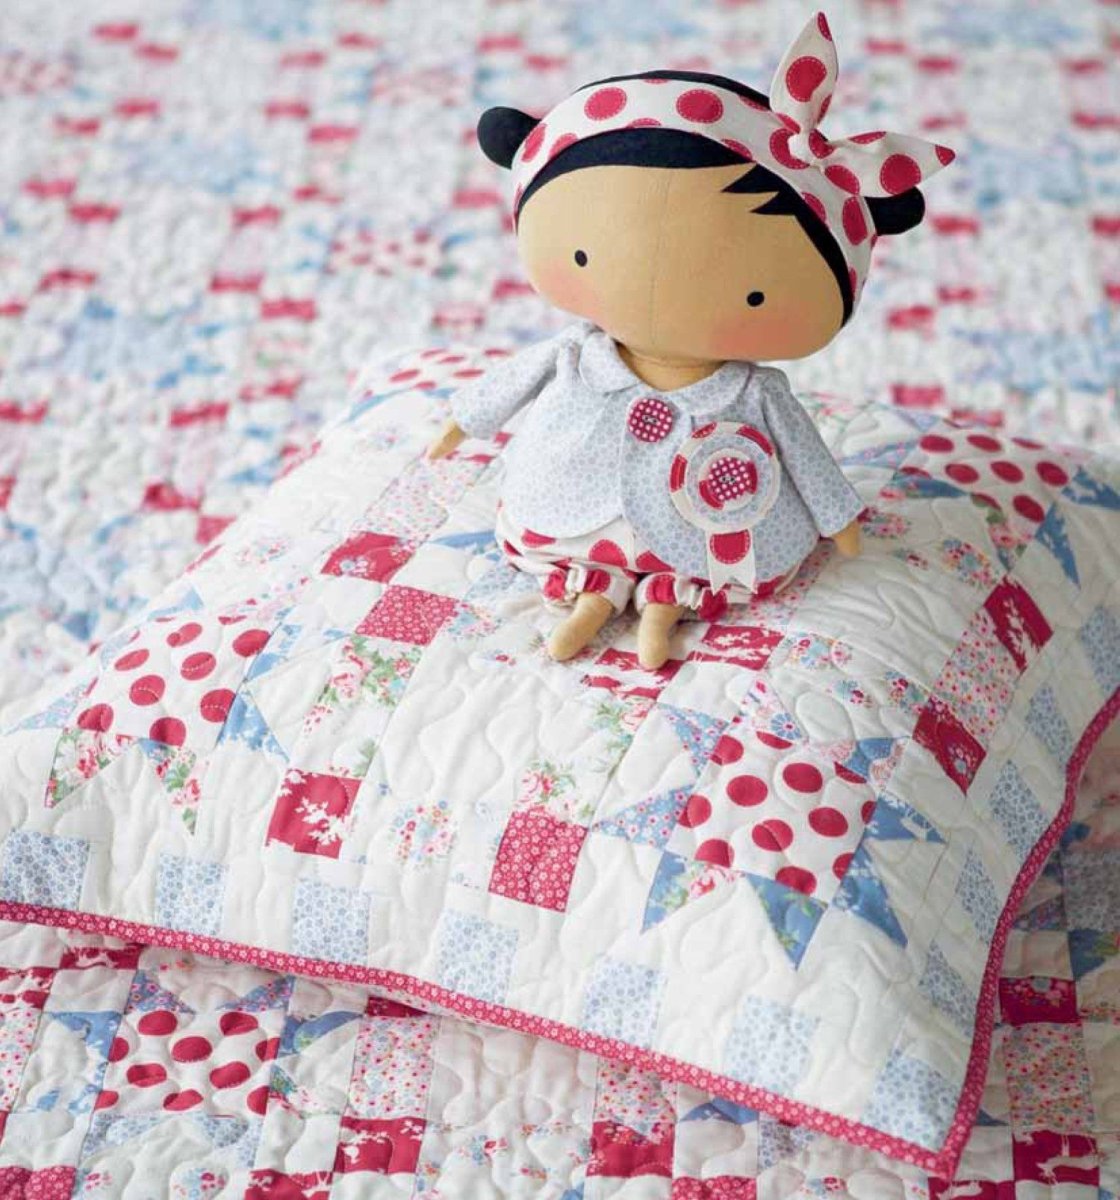 Tilda's Toybox : Sewing Patterns for Soft Toys and More from the Magical World of Tilda